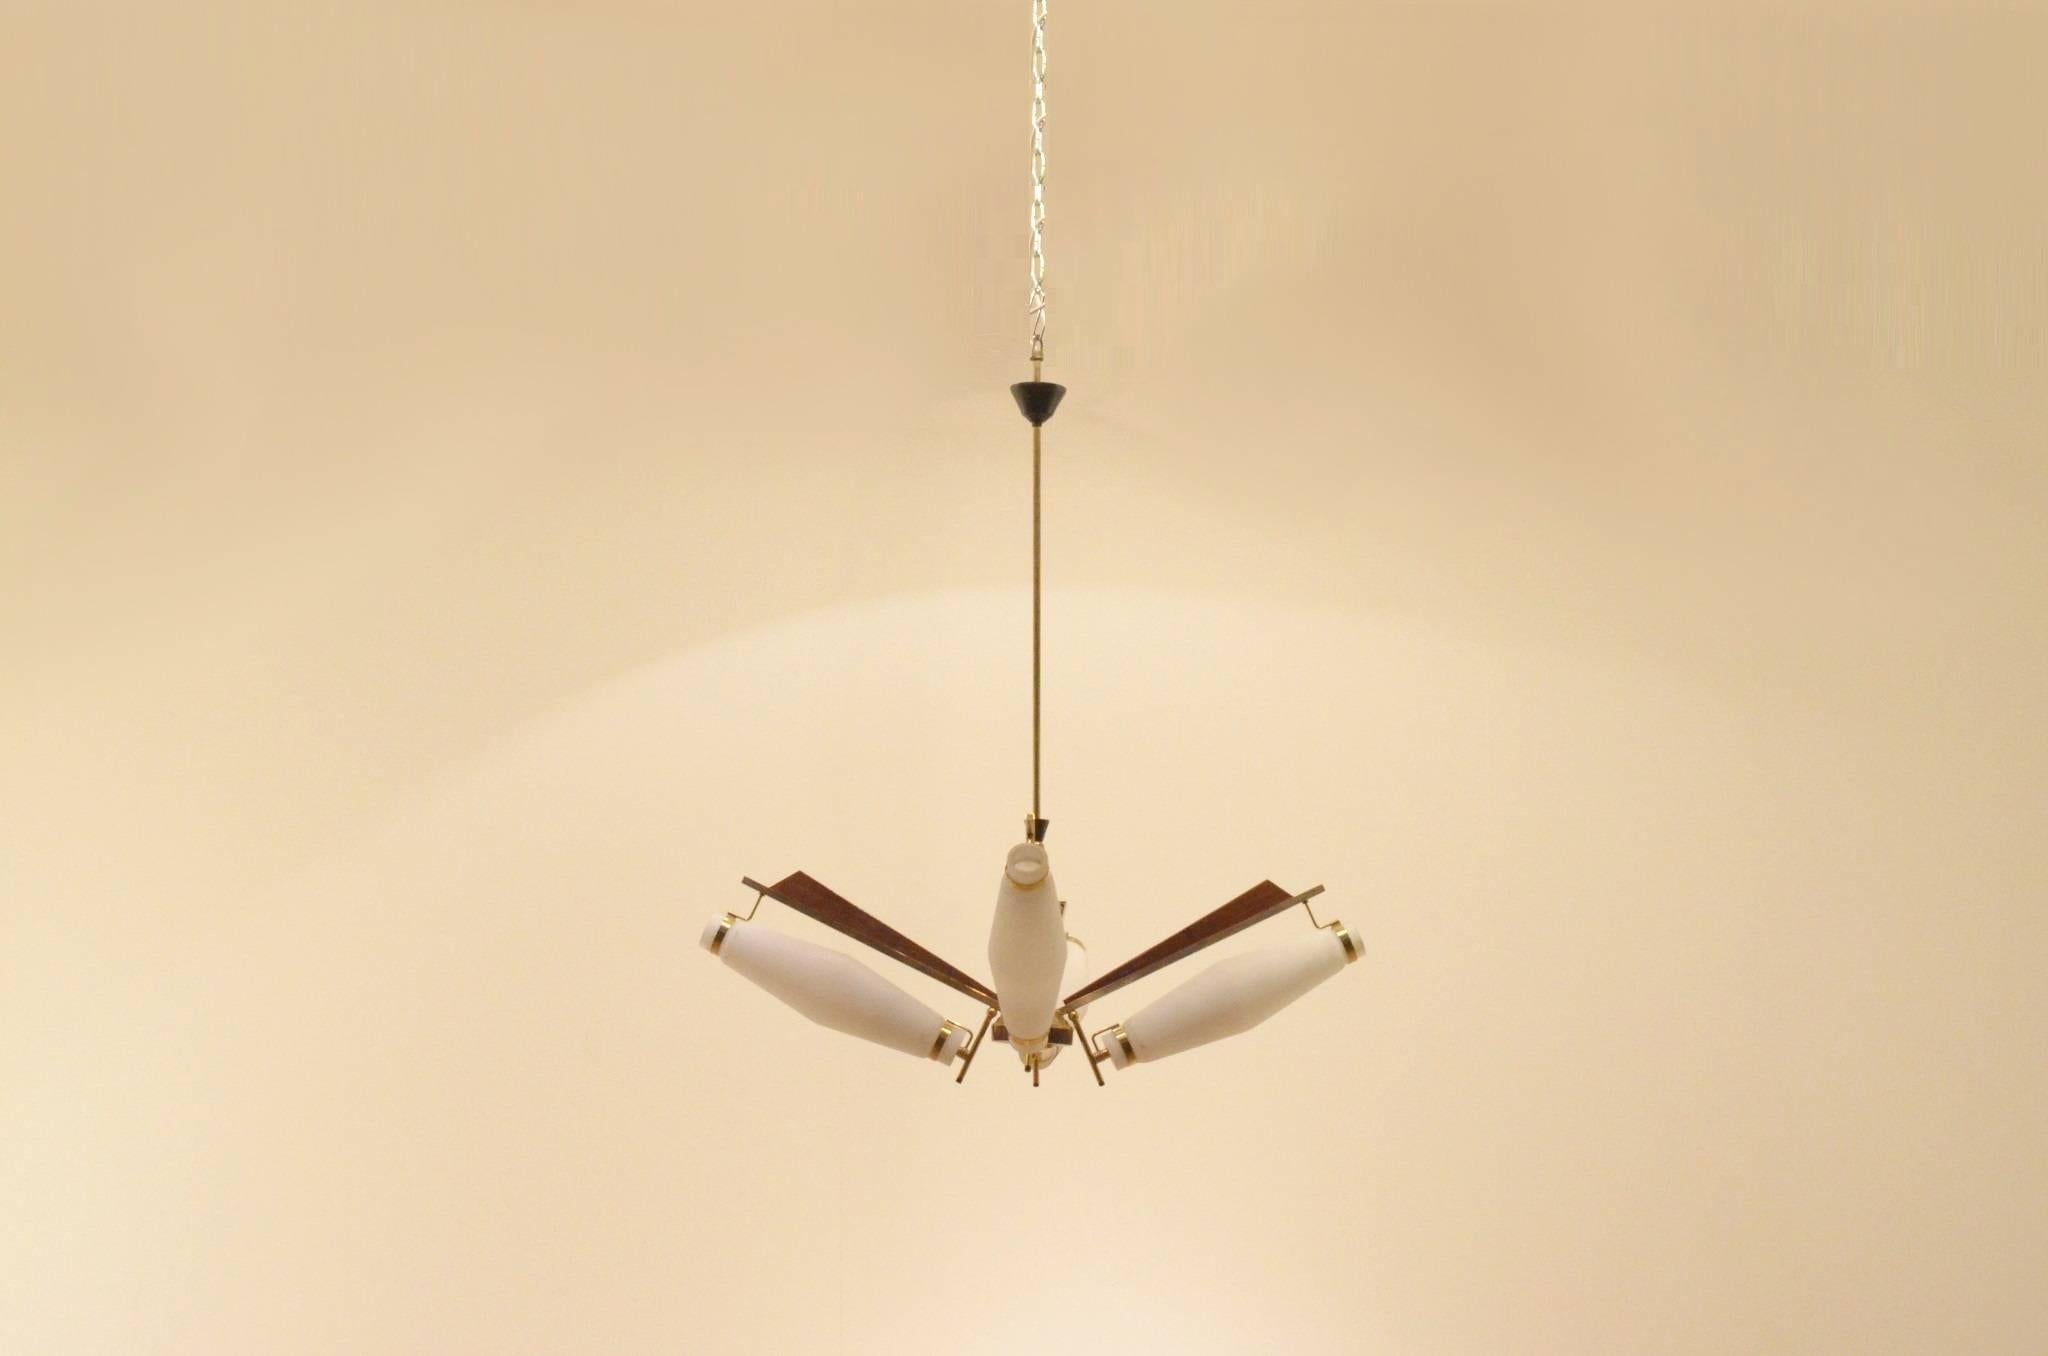 Mid-century Italian pendant lamp 4x opalescent oblong glass diffusers suspended on brass elements.